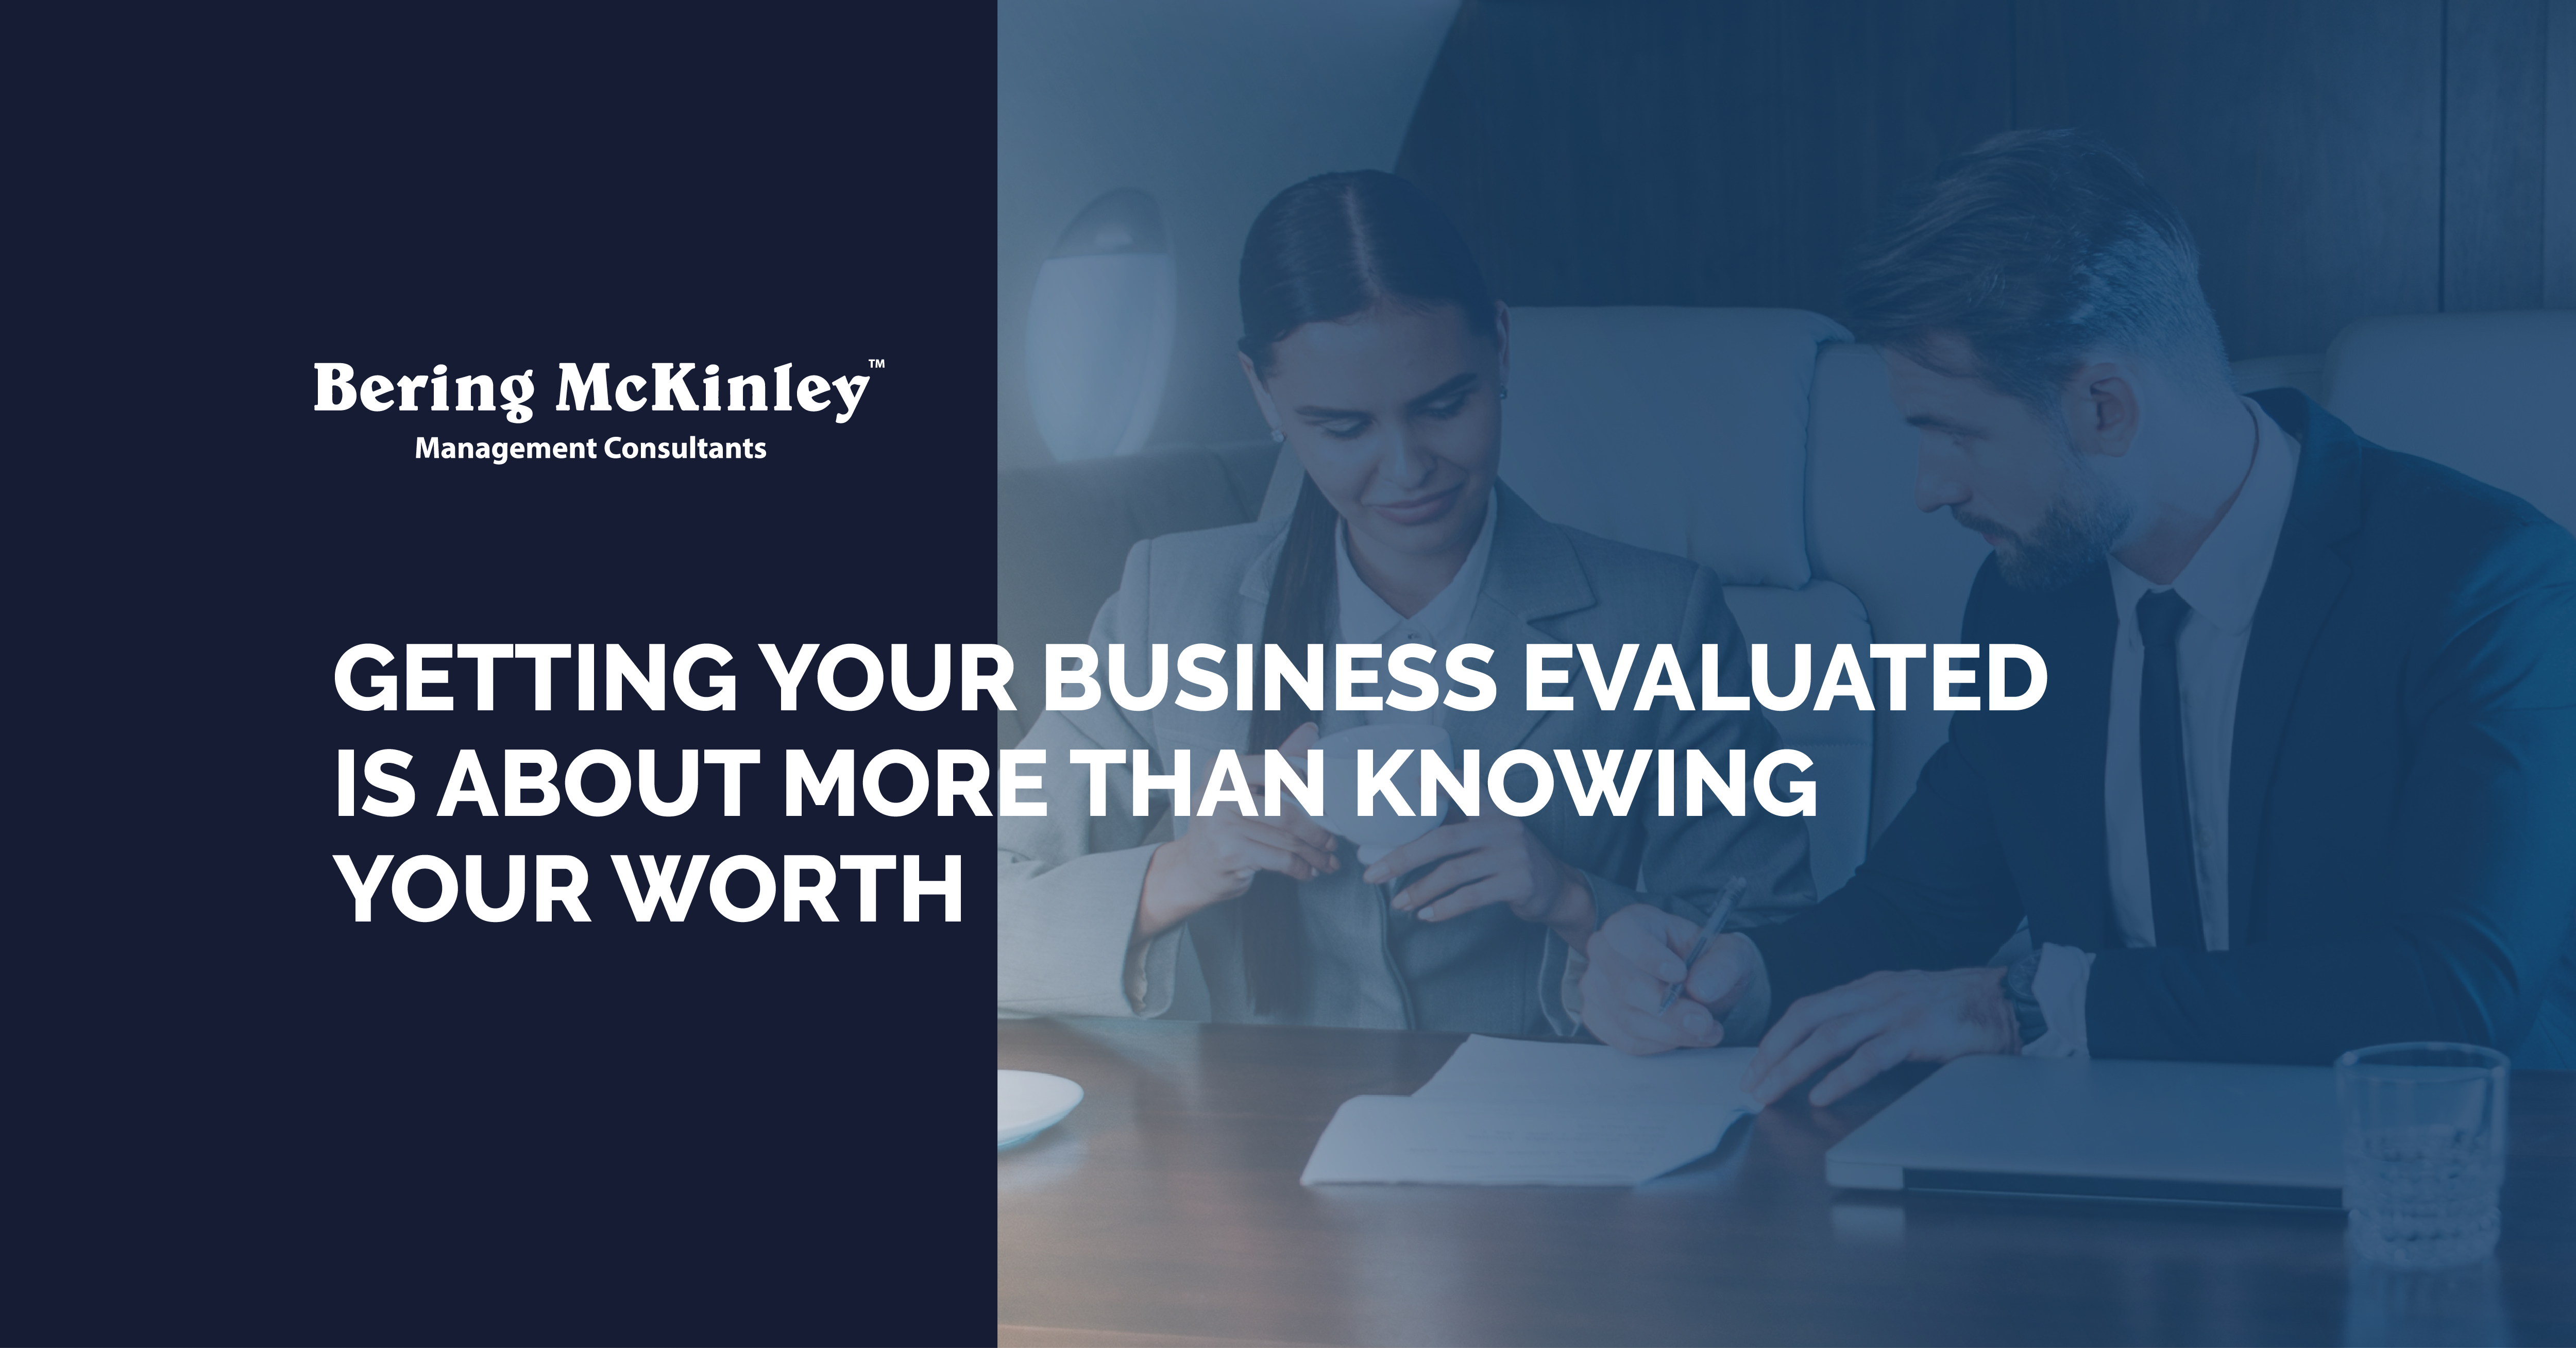 Getting Your Business Evaluated Is About More Than Knowing Your Worth